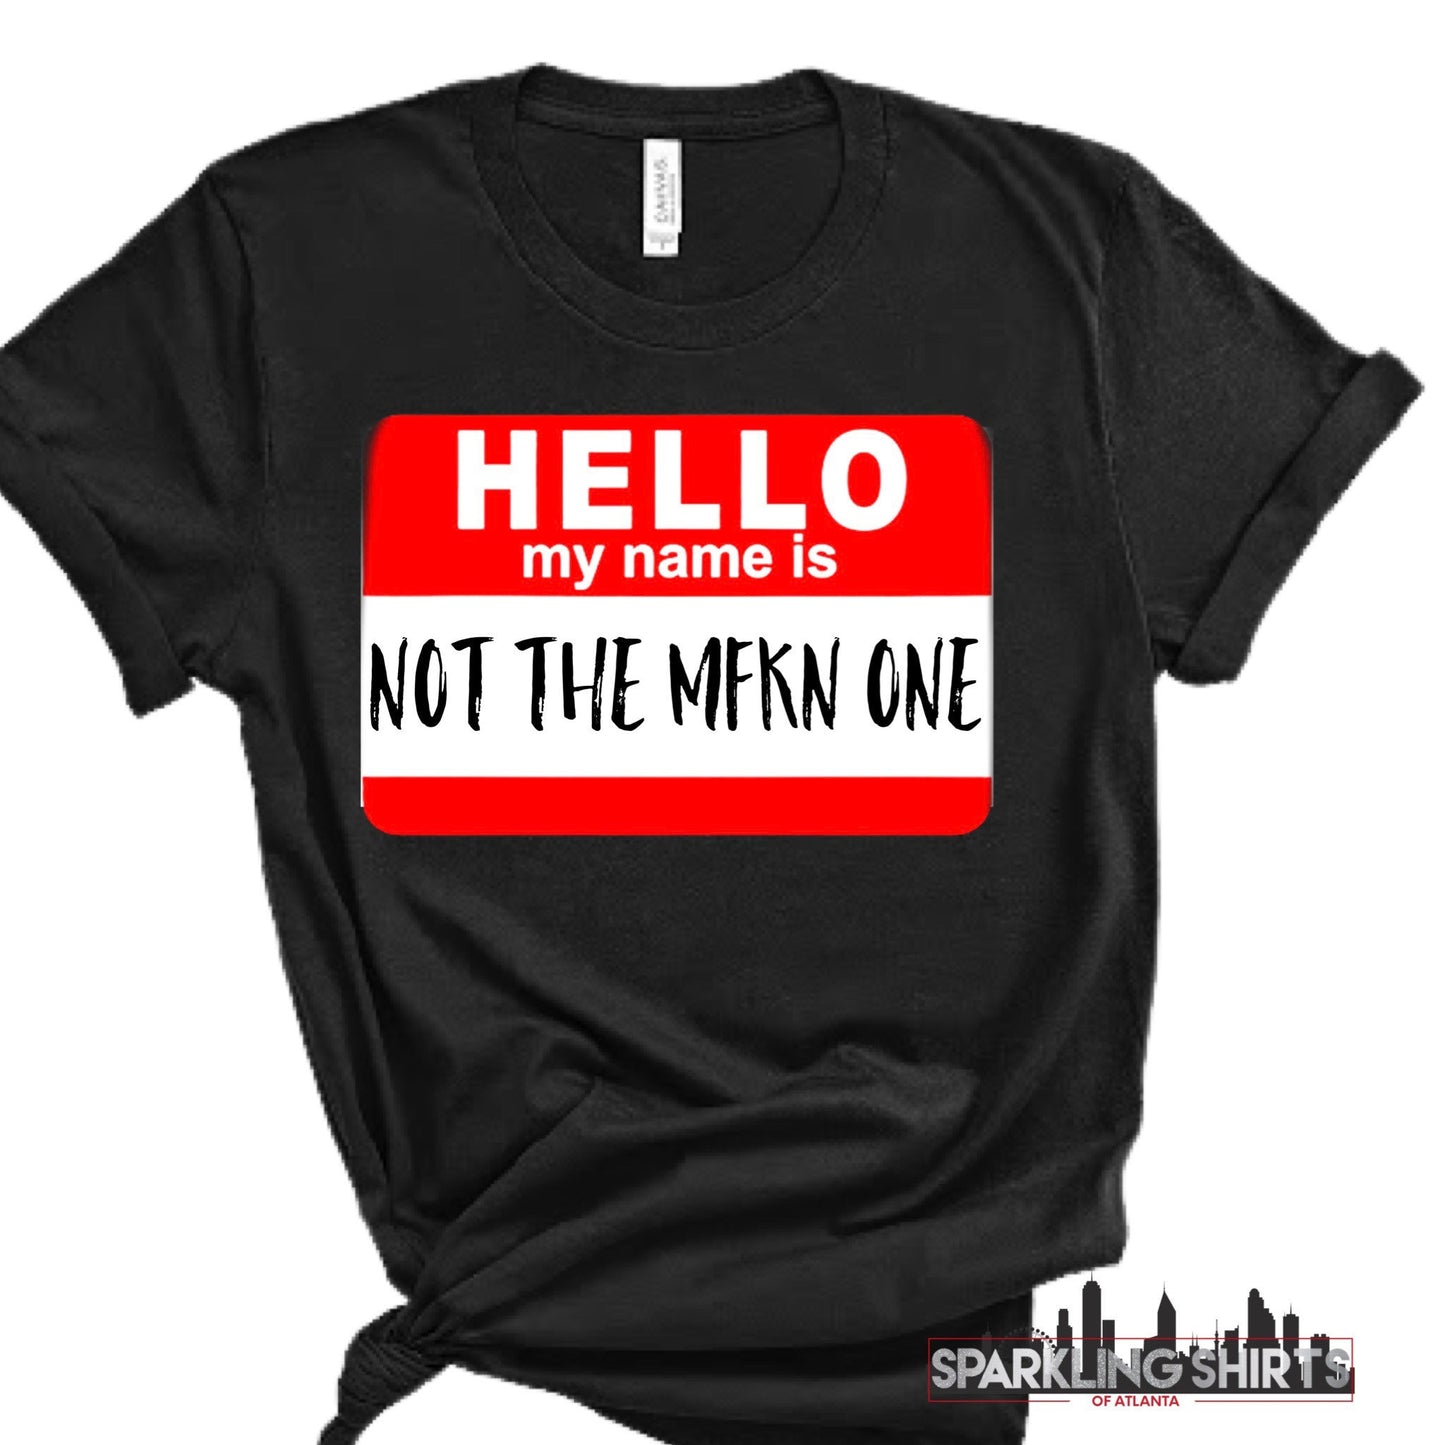 Hello, My Name Is| Funny| Sassy| Comical| Fun T-shirts| Graphic T-shirt